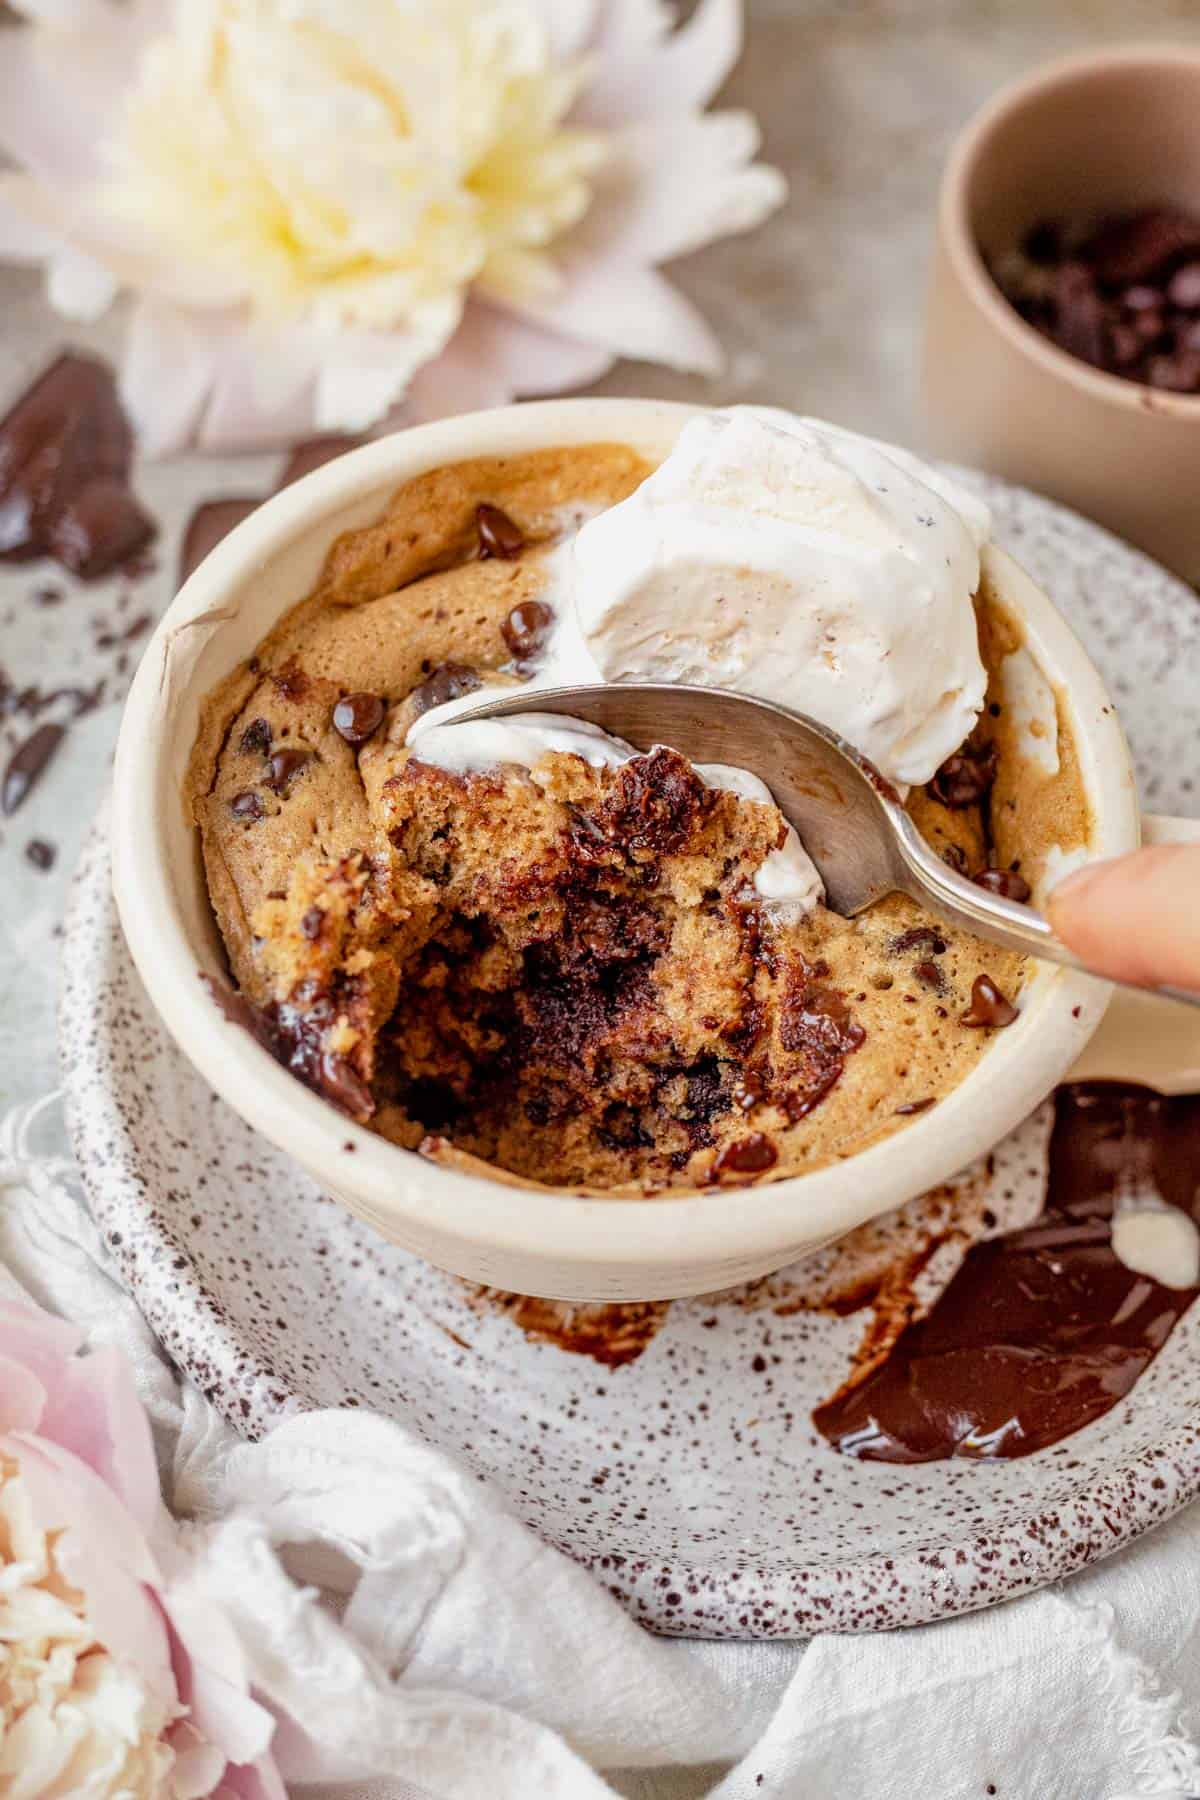 taking a bite out of a chocolate chip mug cake